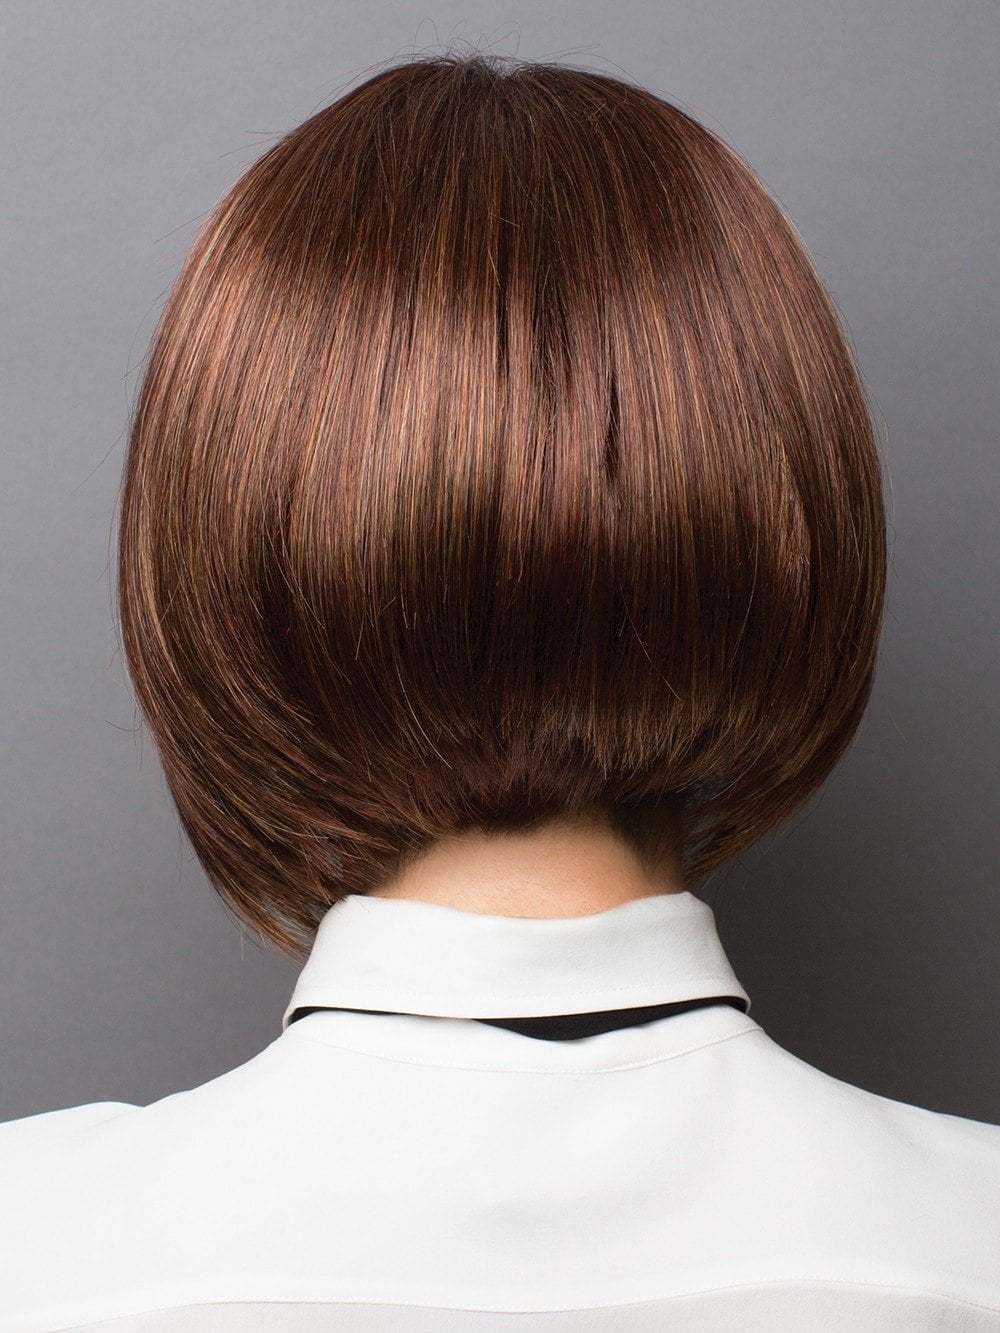 Modern bob with great thickness in fringe